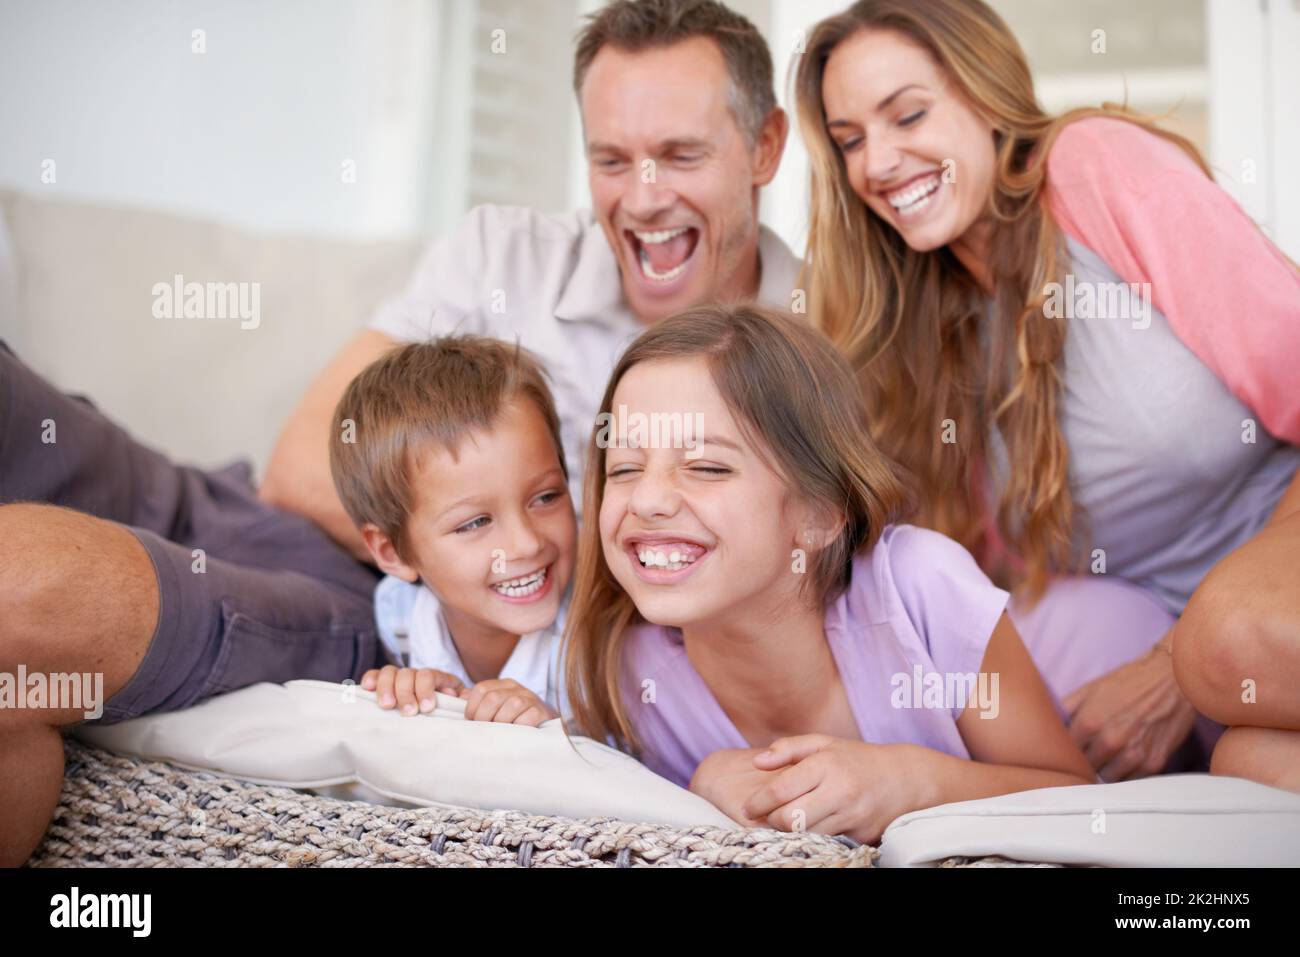 Attack of the tickle monsters. Shot of a happy young family playing together. Stock Photo